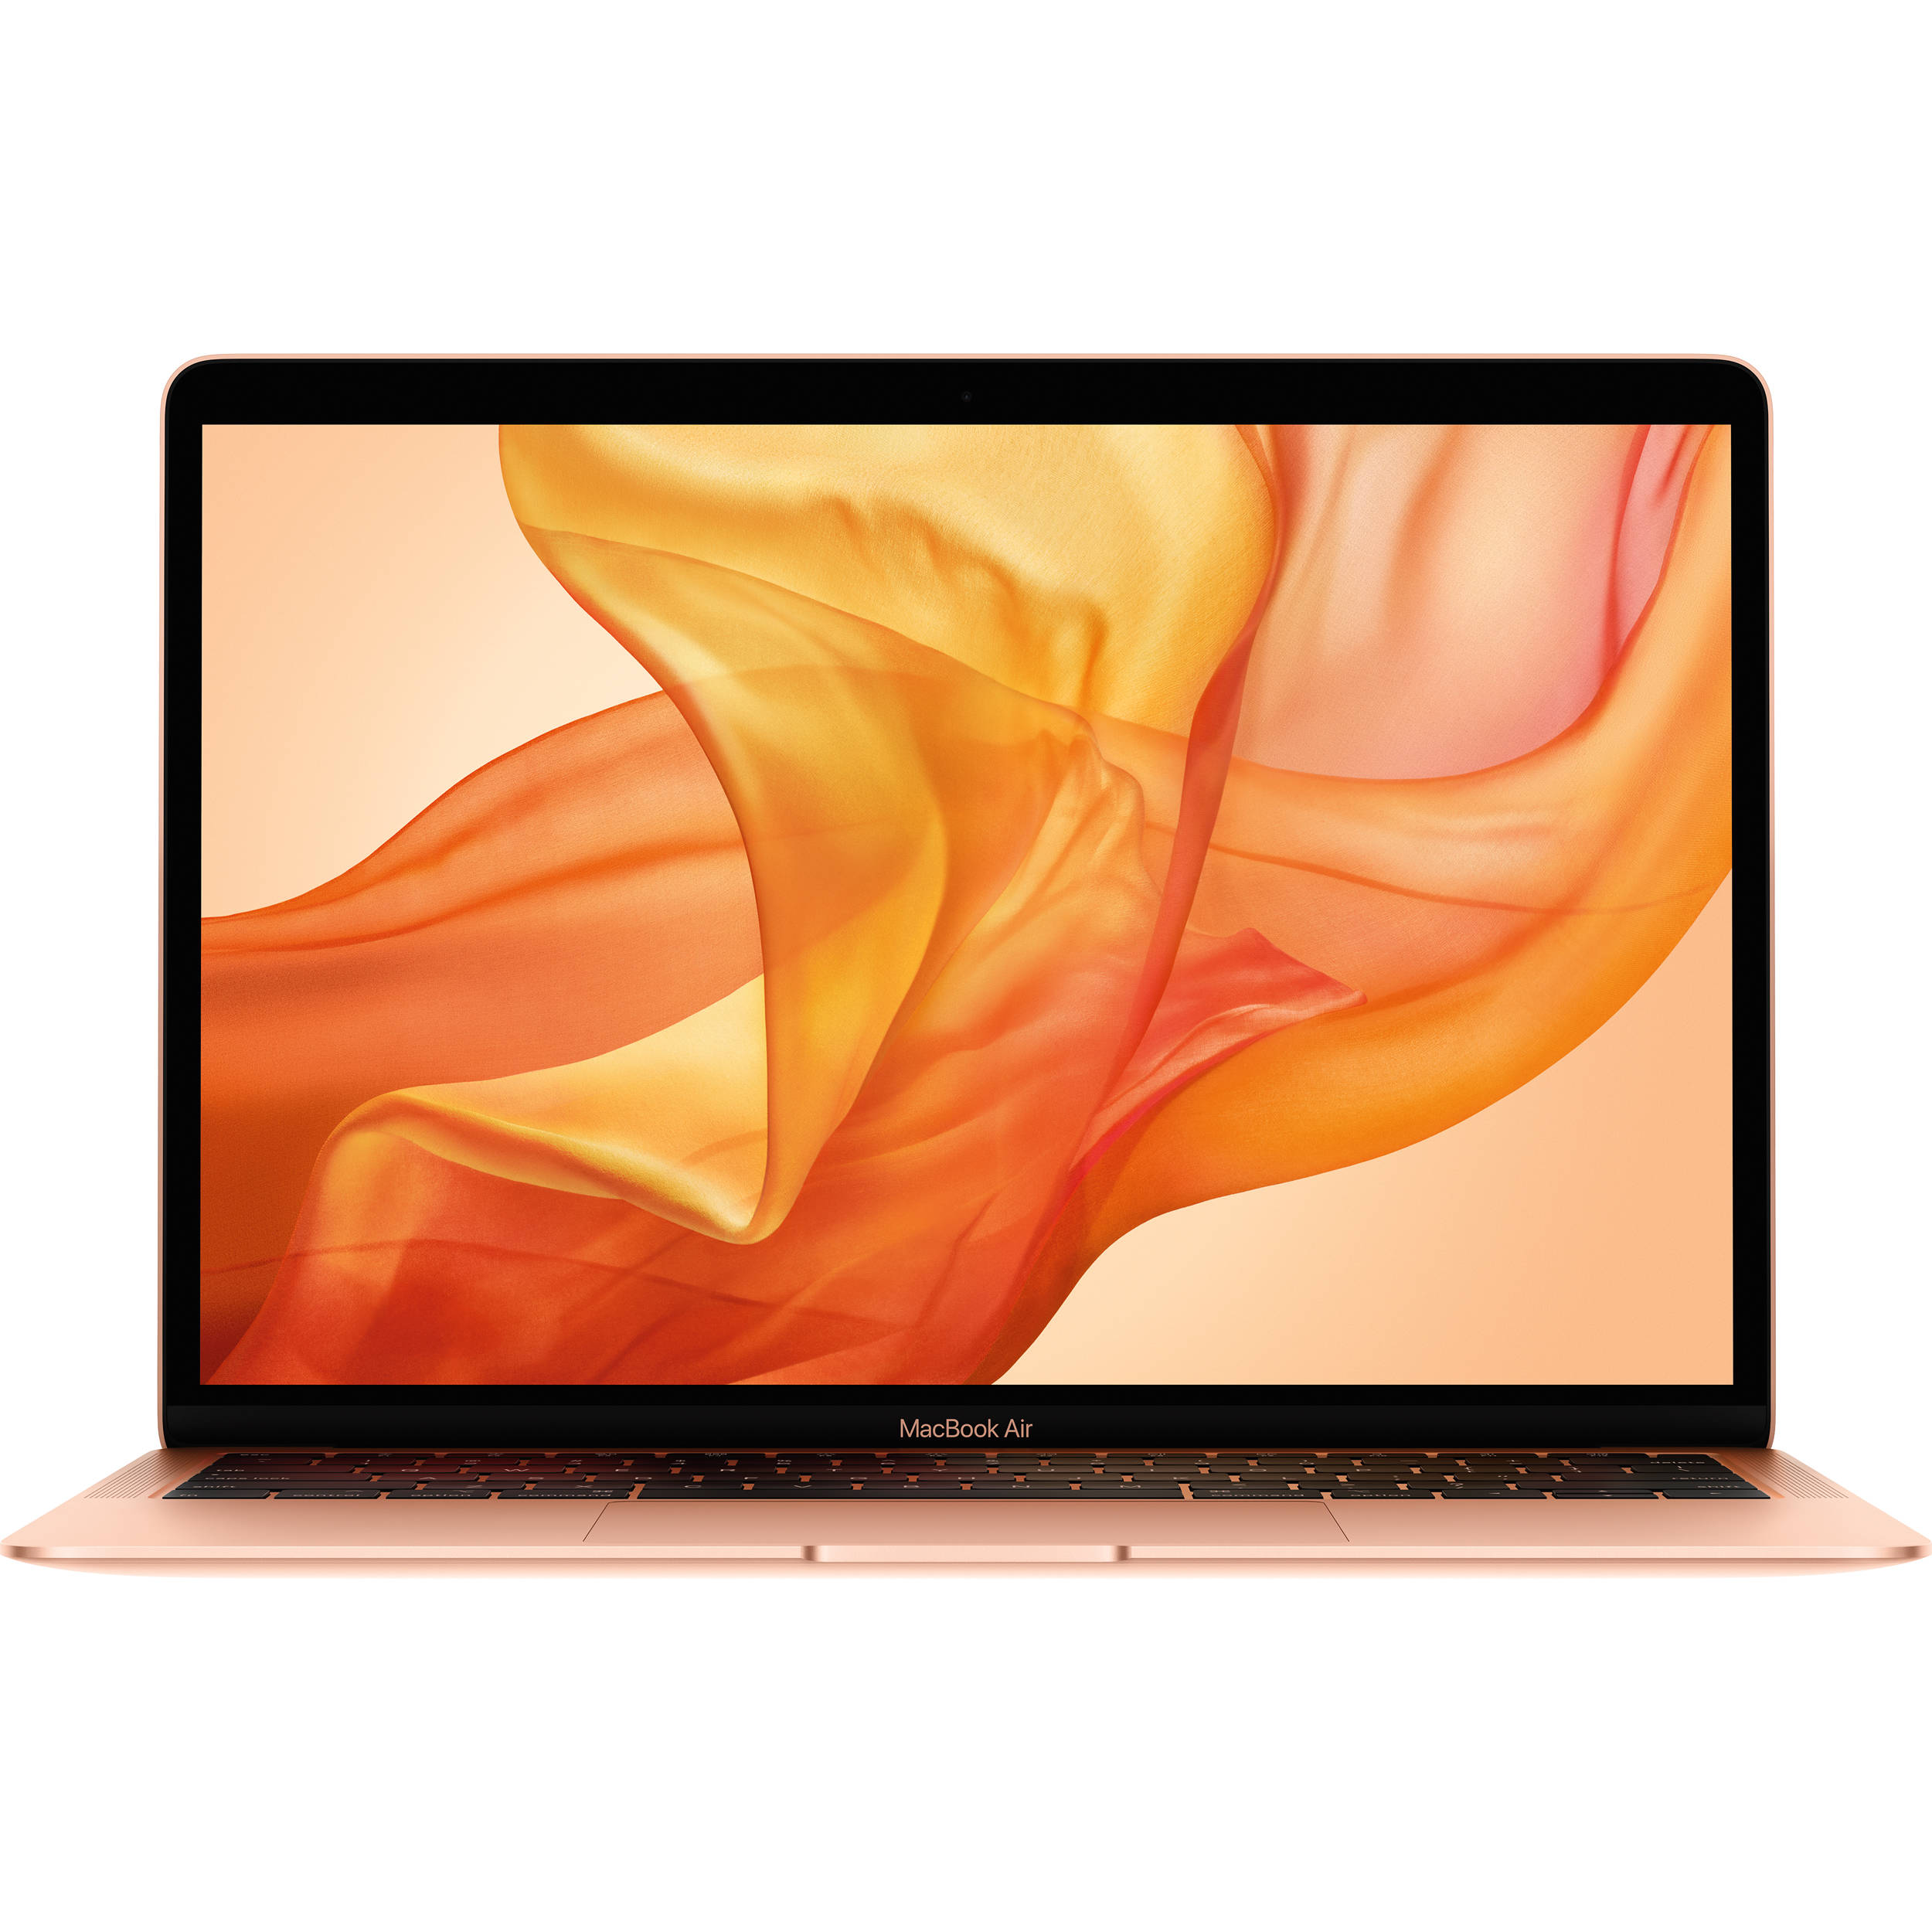 Macbook Air 13'' 2018 256GB SSD (Sliver, Gold, Space Gray)(CPO)